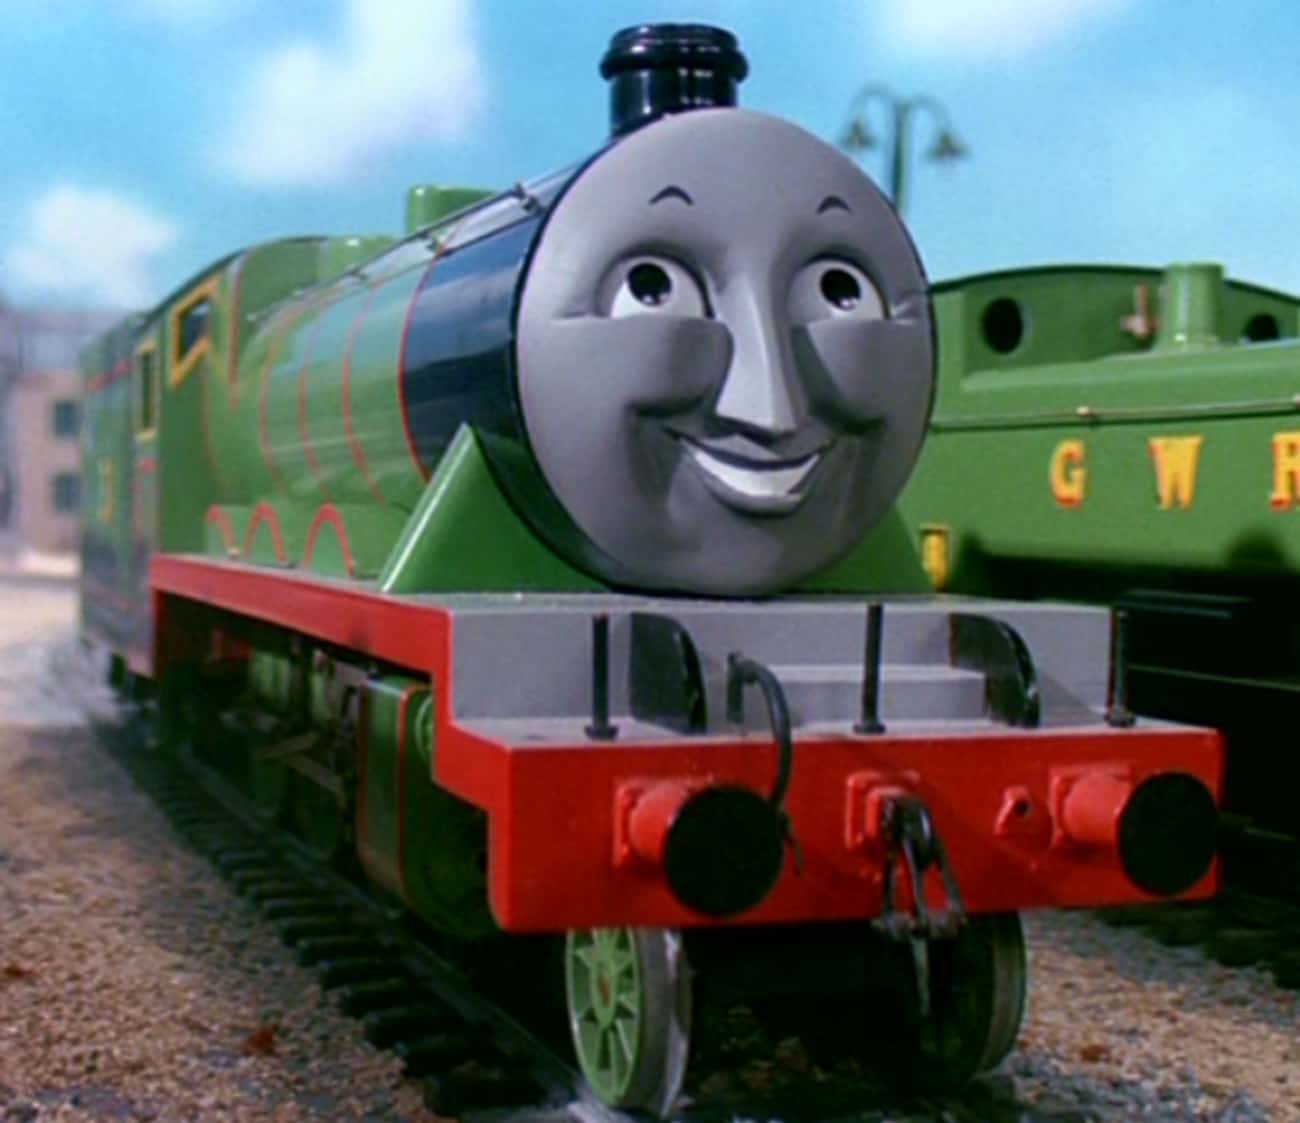 Sodor Operates Under Strict Rules And Punishment